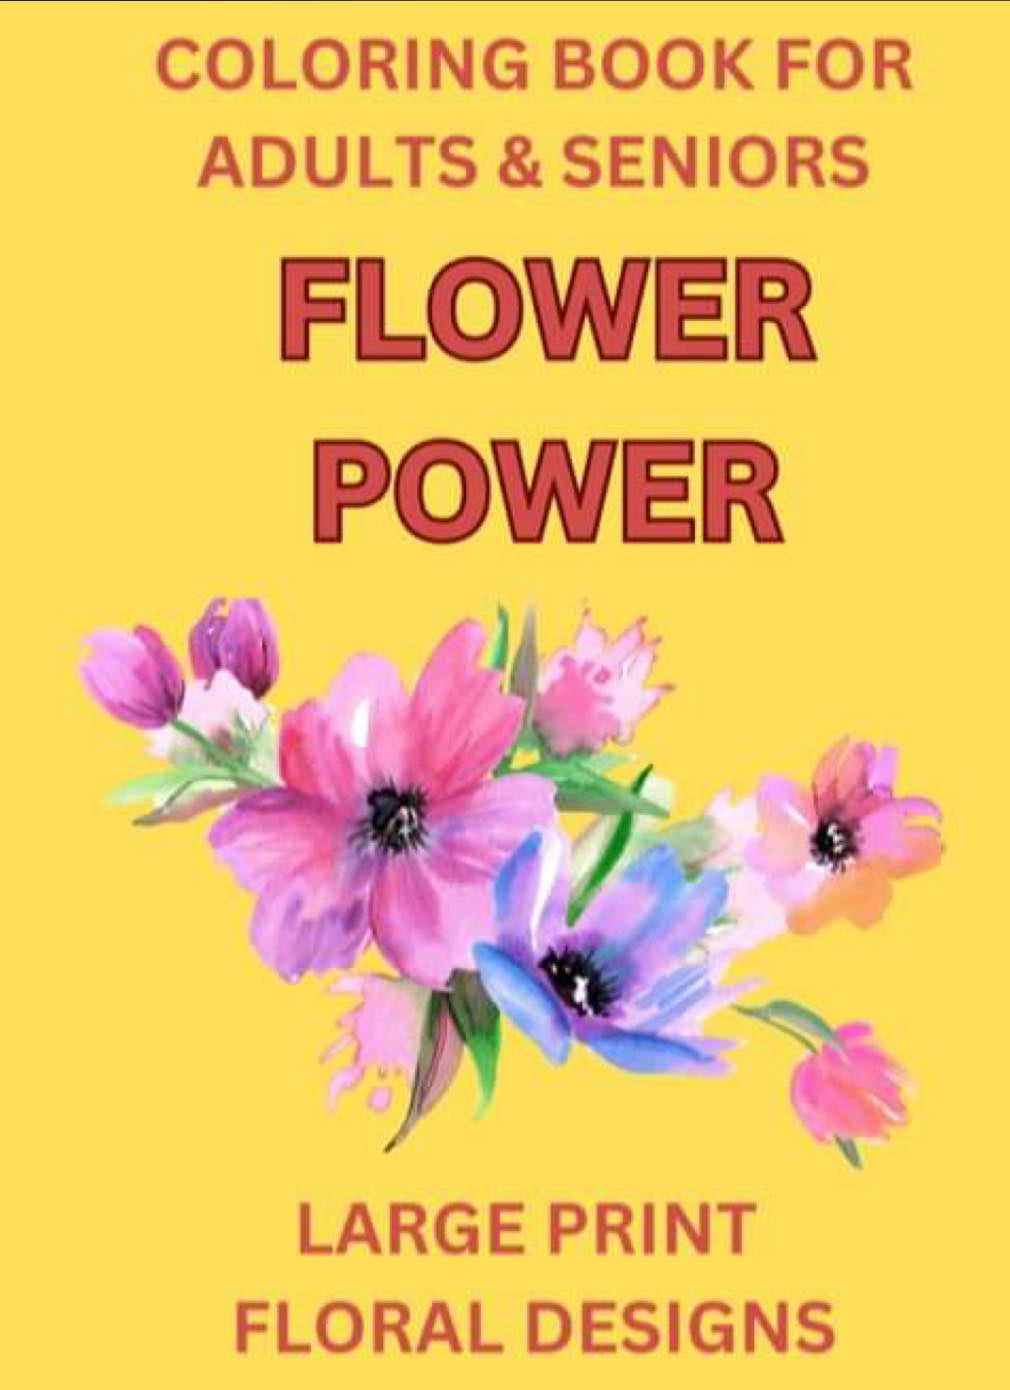 Digital Version of Flower Power: Coloring Book for Adults and Seniors